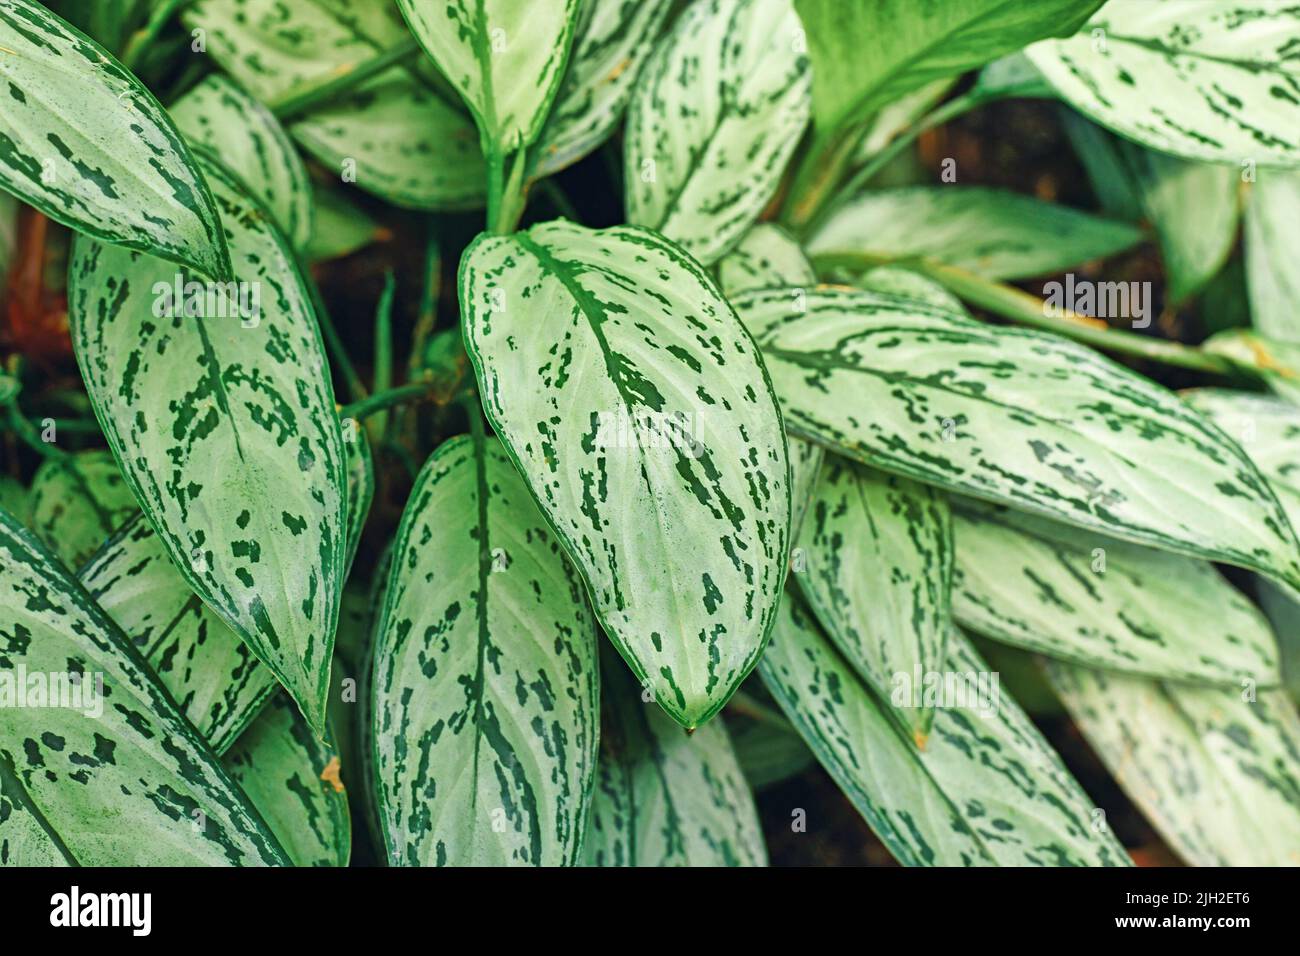 Leaves of tropical 'Aglaonema Commutatum Silver Queen' plant with beautiful silver markings Stock Photo